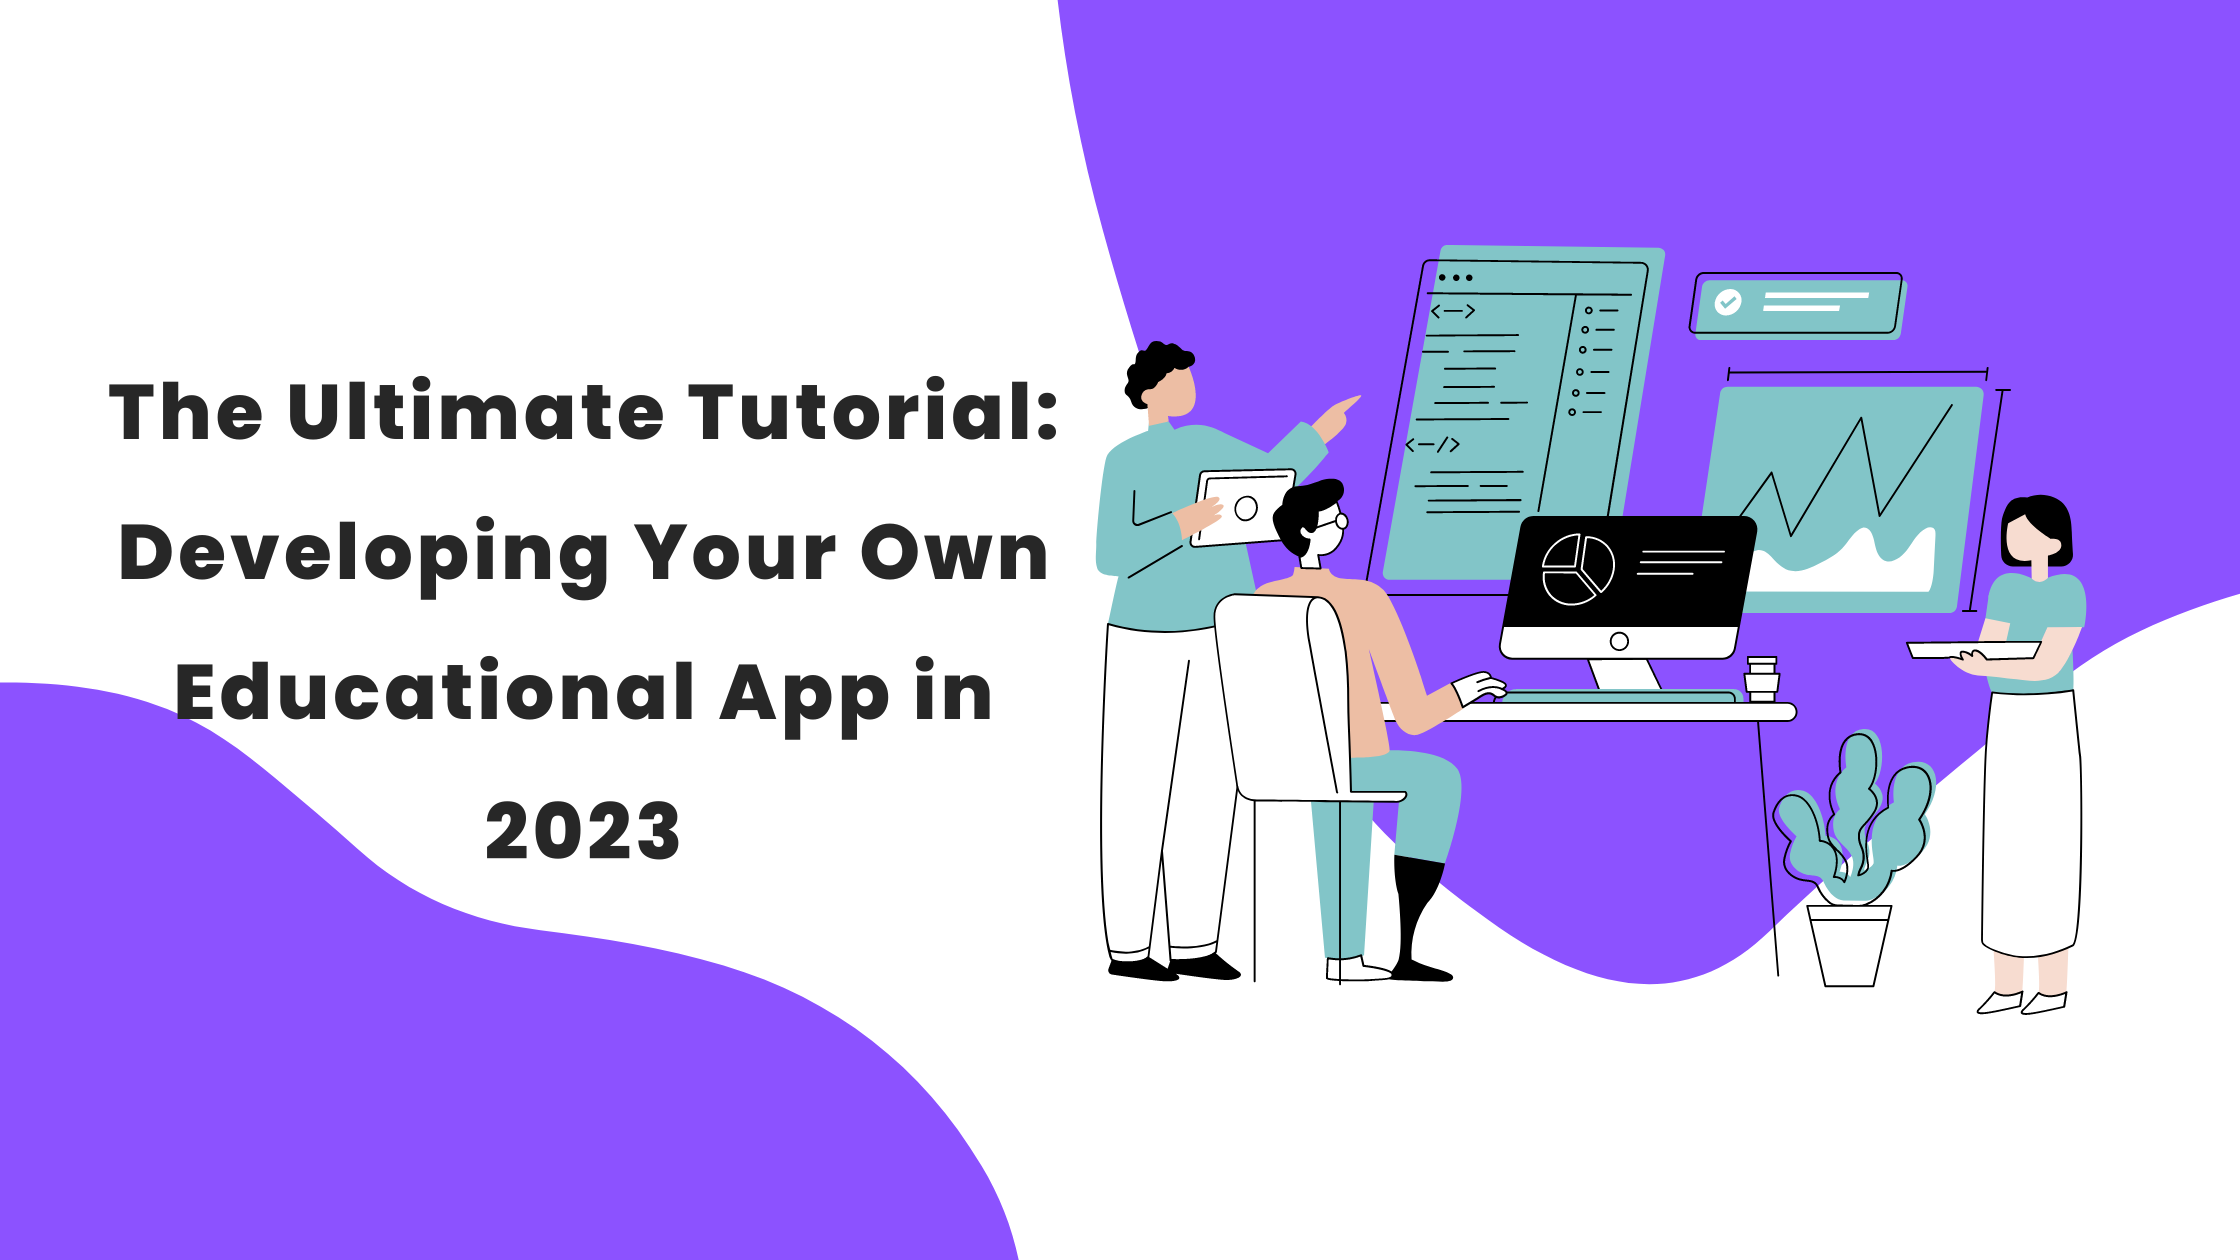 The Ultimate Tutorial: Developing Your Own Educational App in 2023